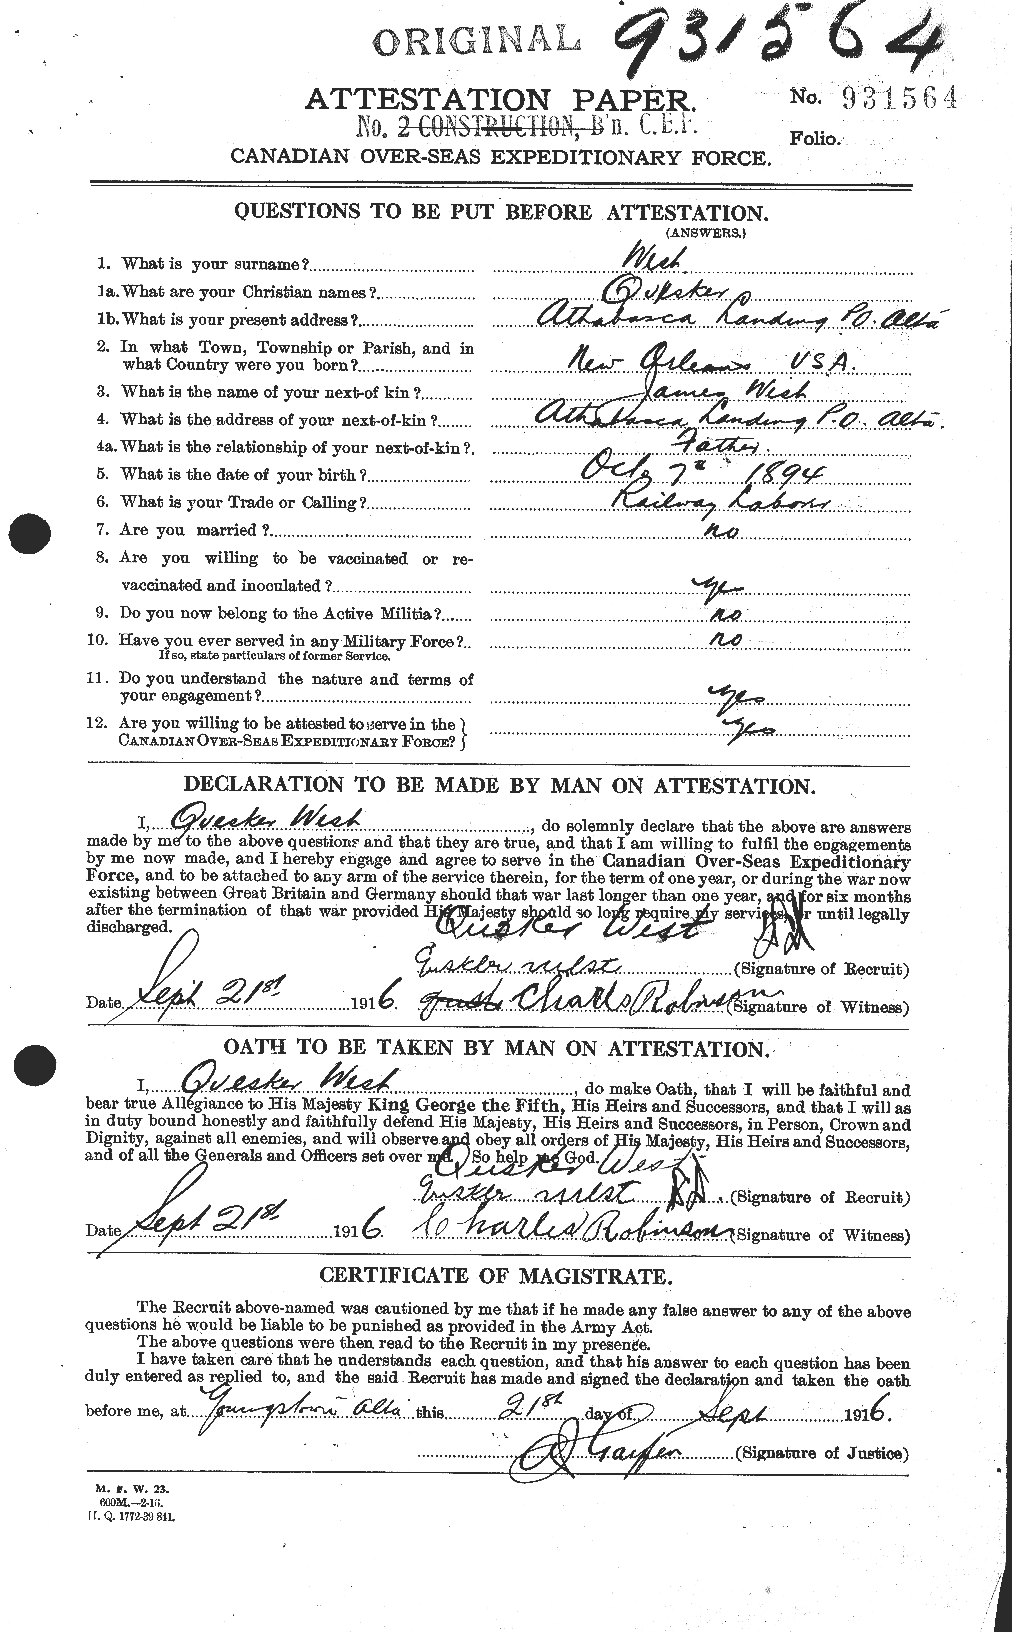 Personnel Records of the First World War - CEF 667890a